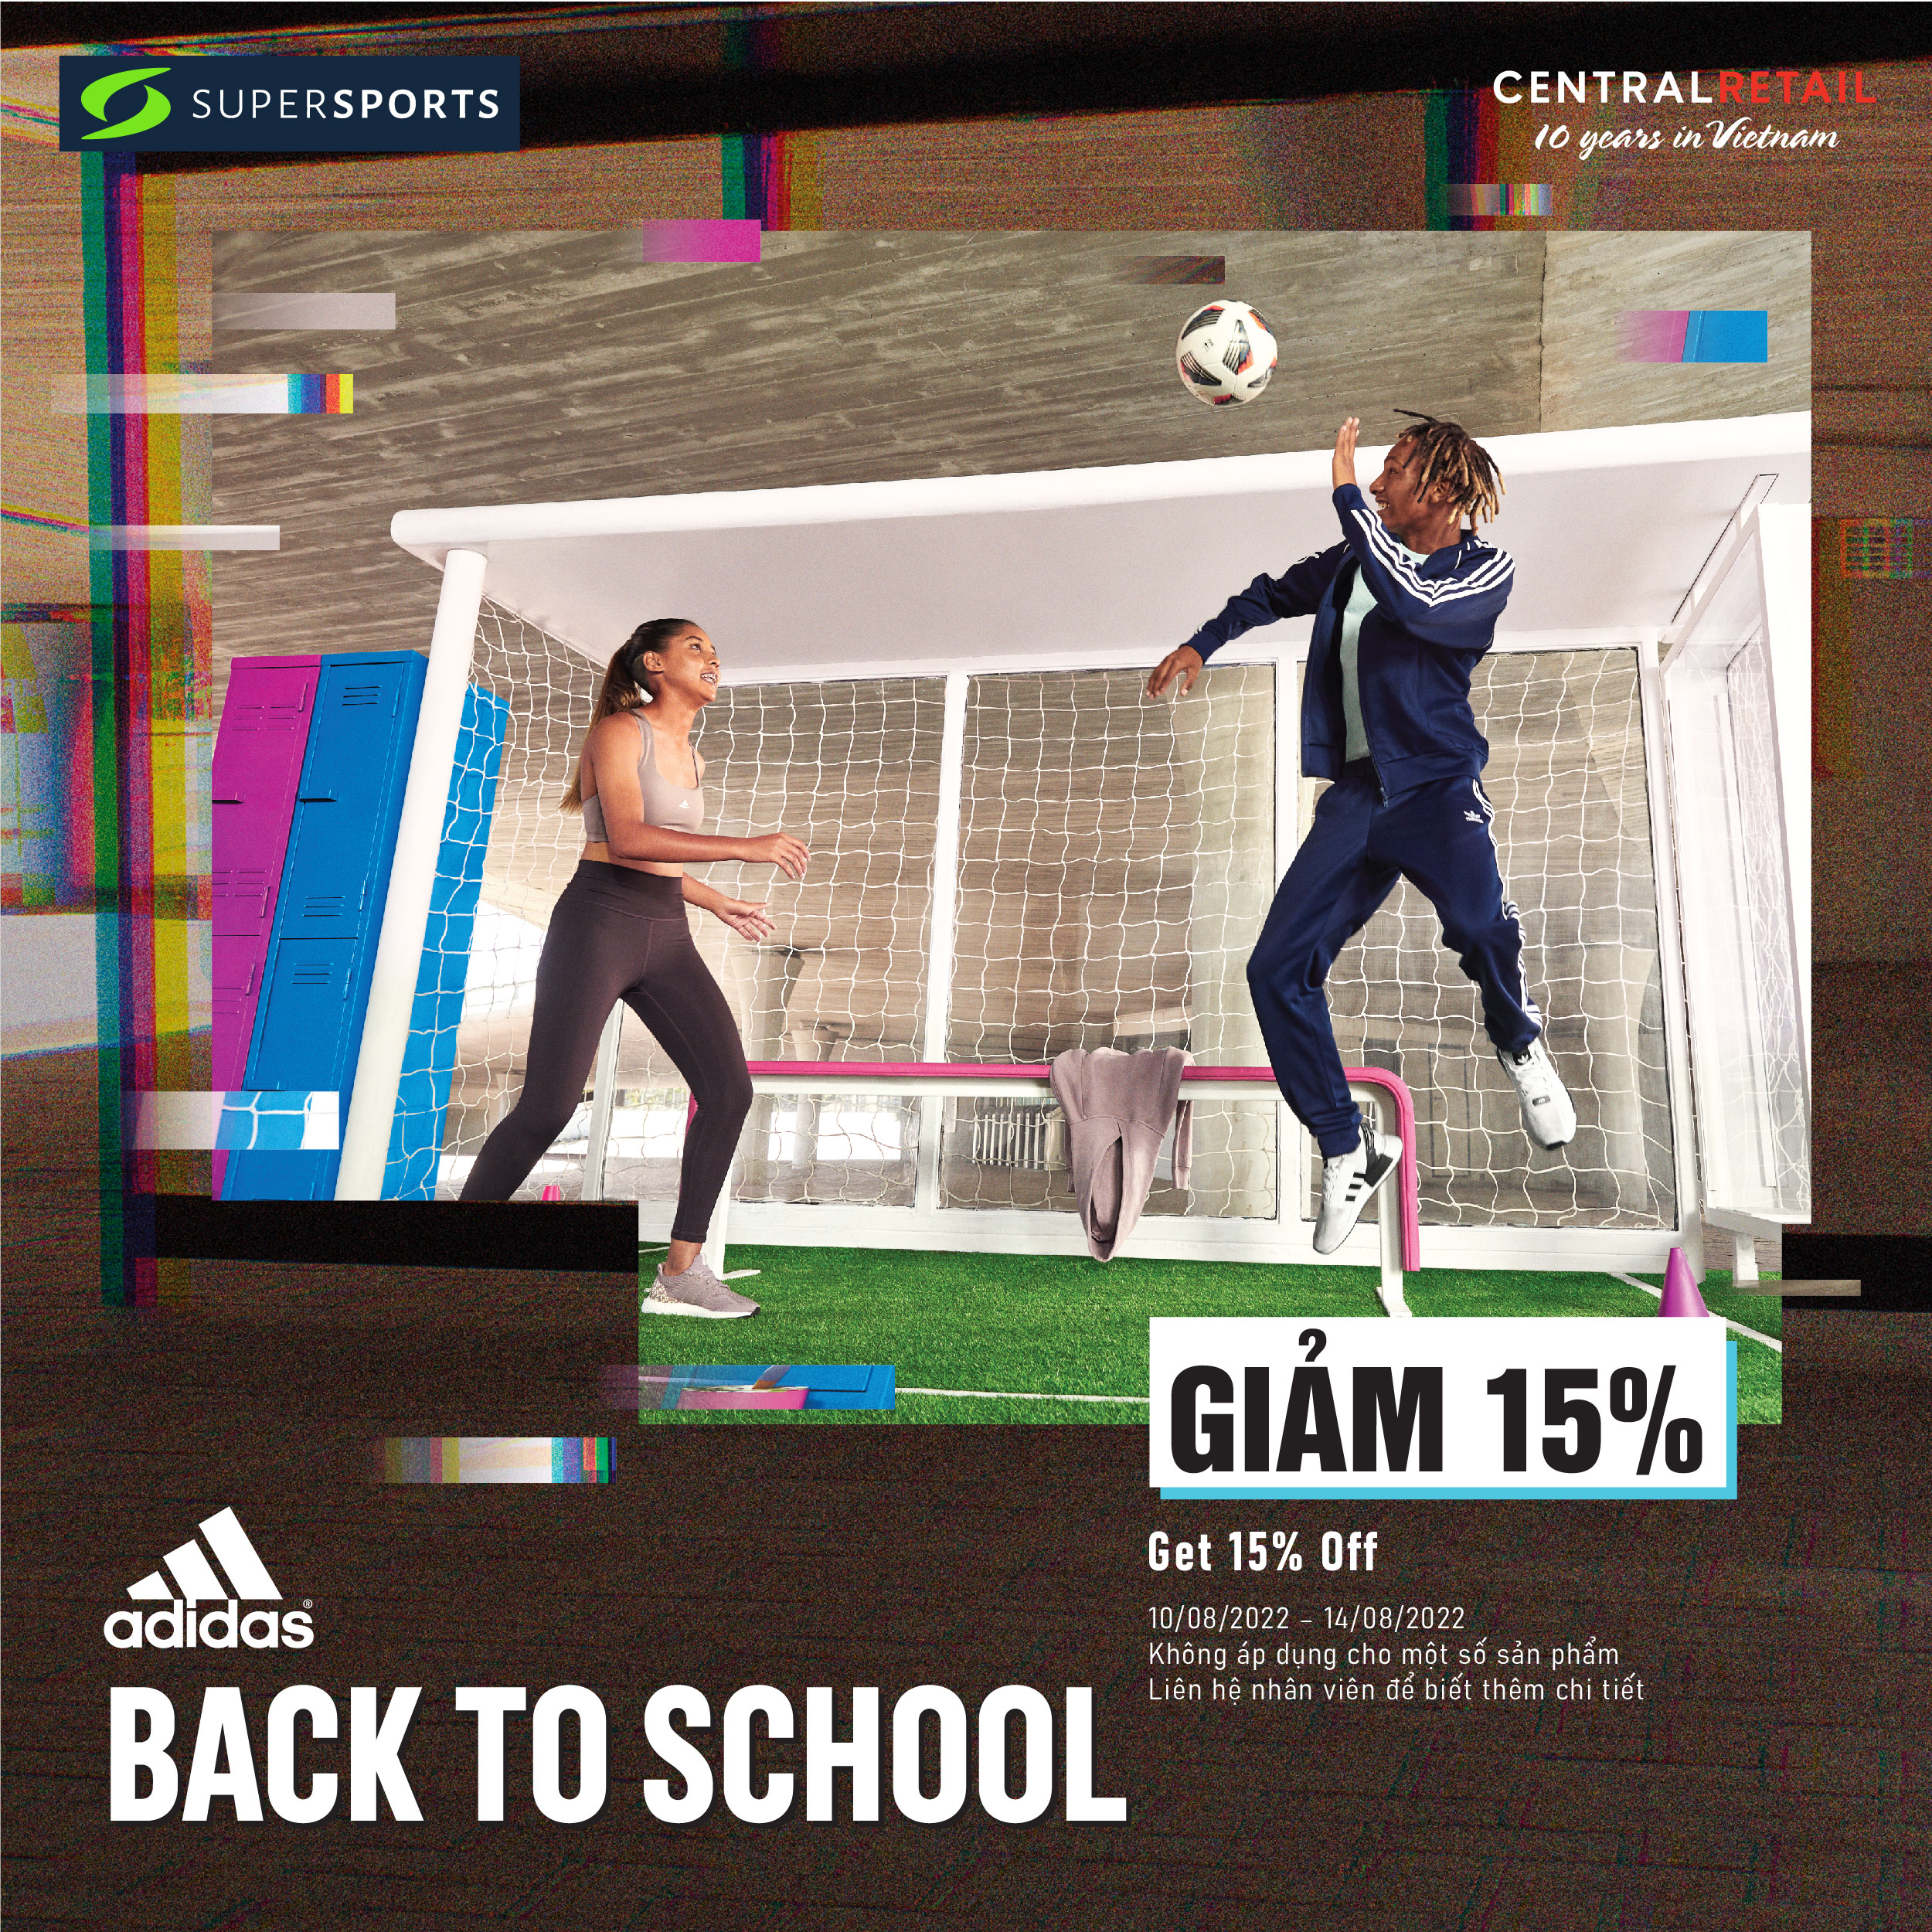 ADIDAS - BACK TO SCHOOL: DYNAMIC WITH ADIDAS AT SUPERSPORTS 🔥